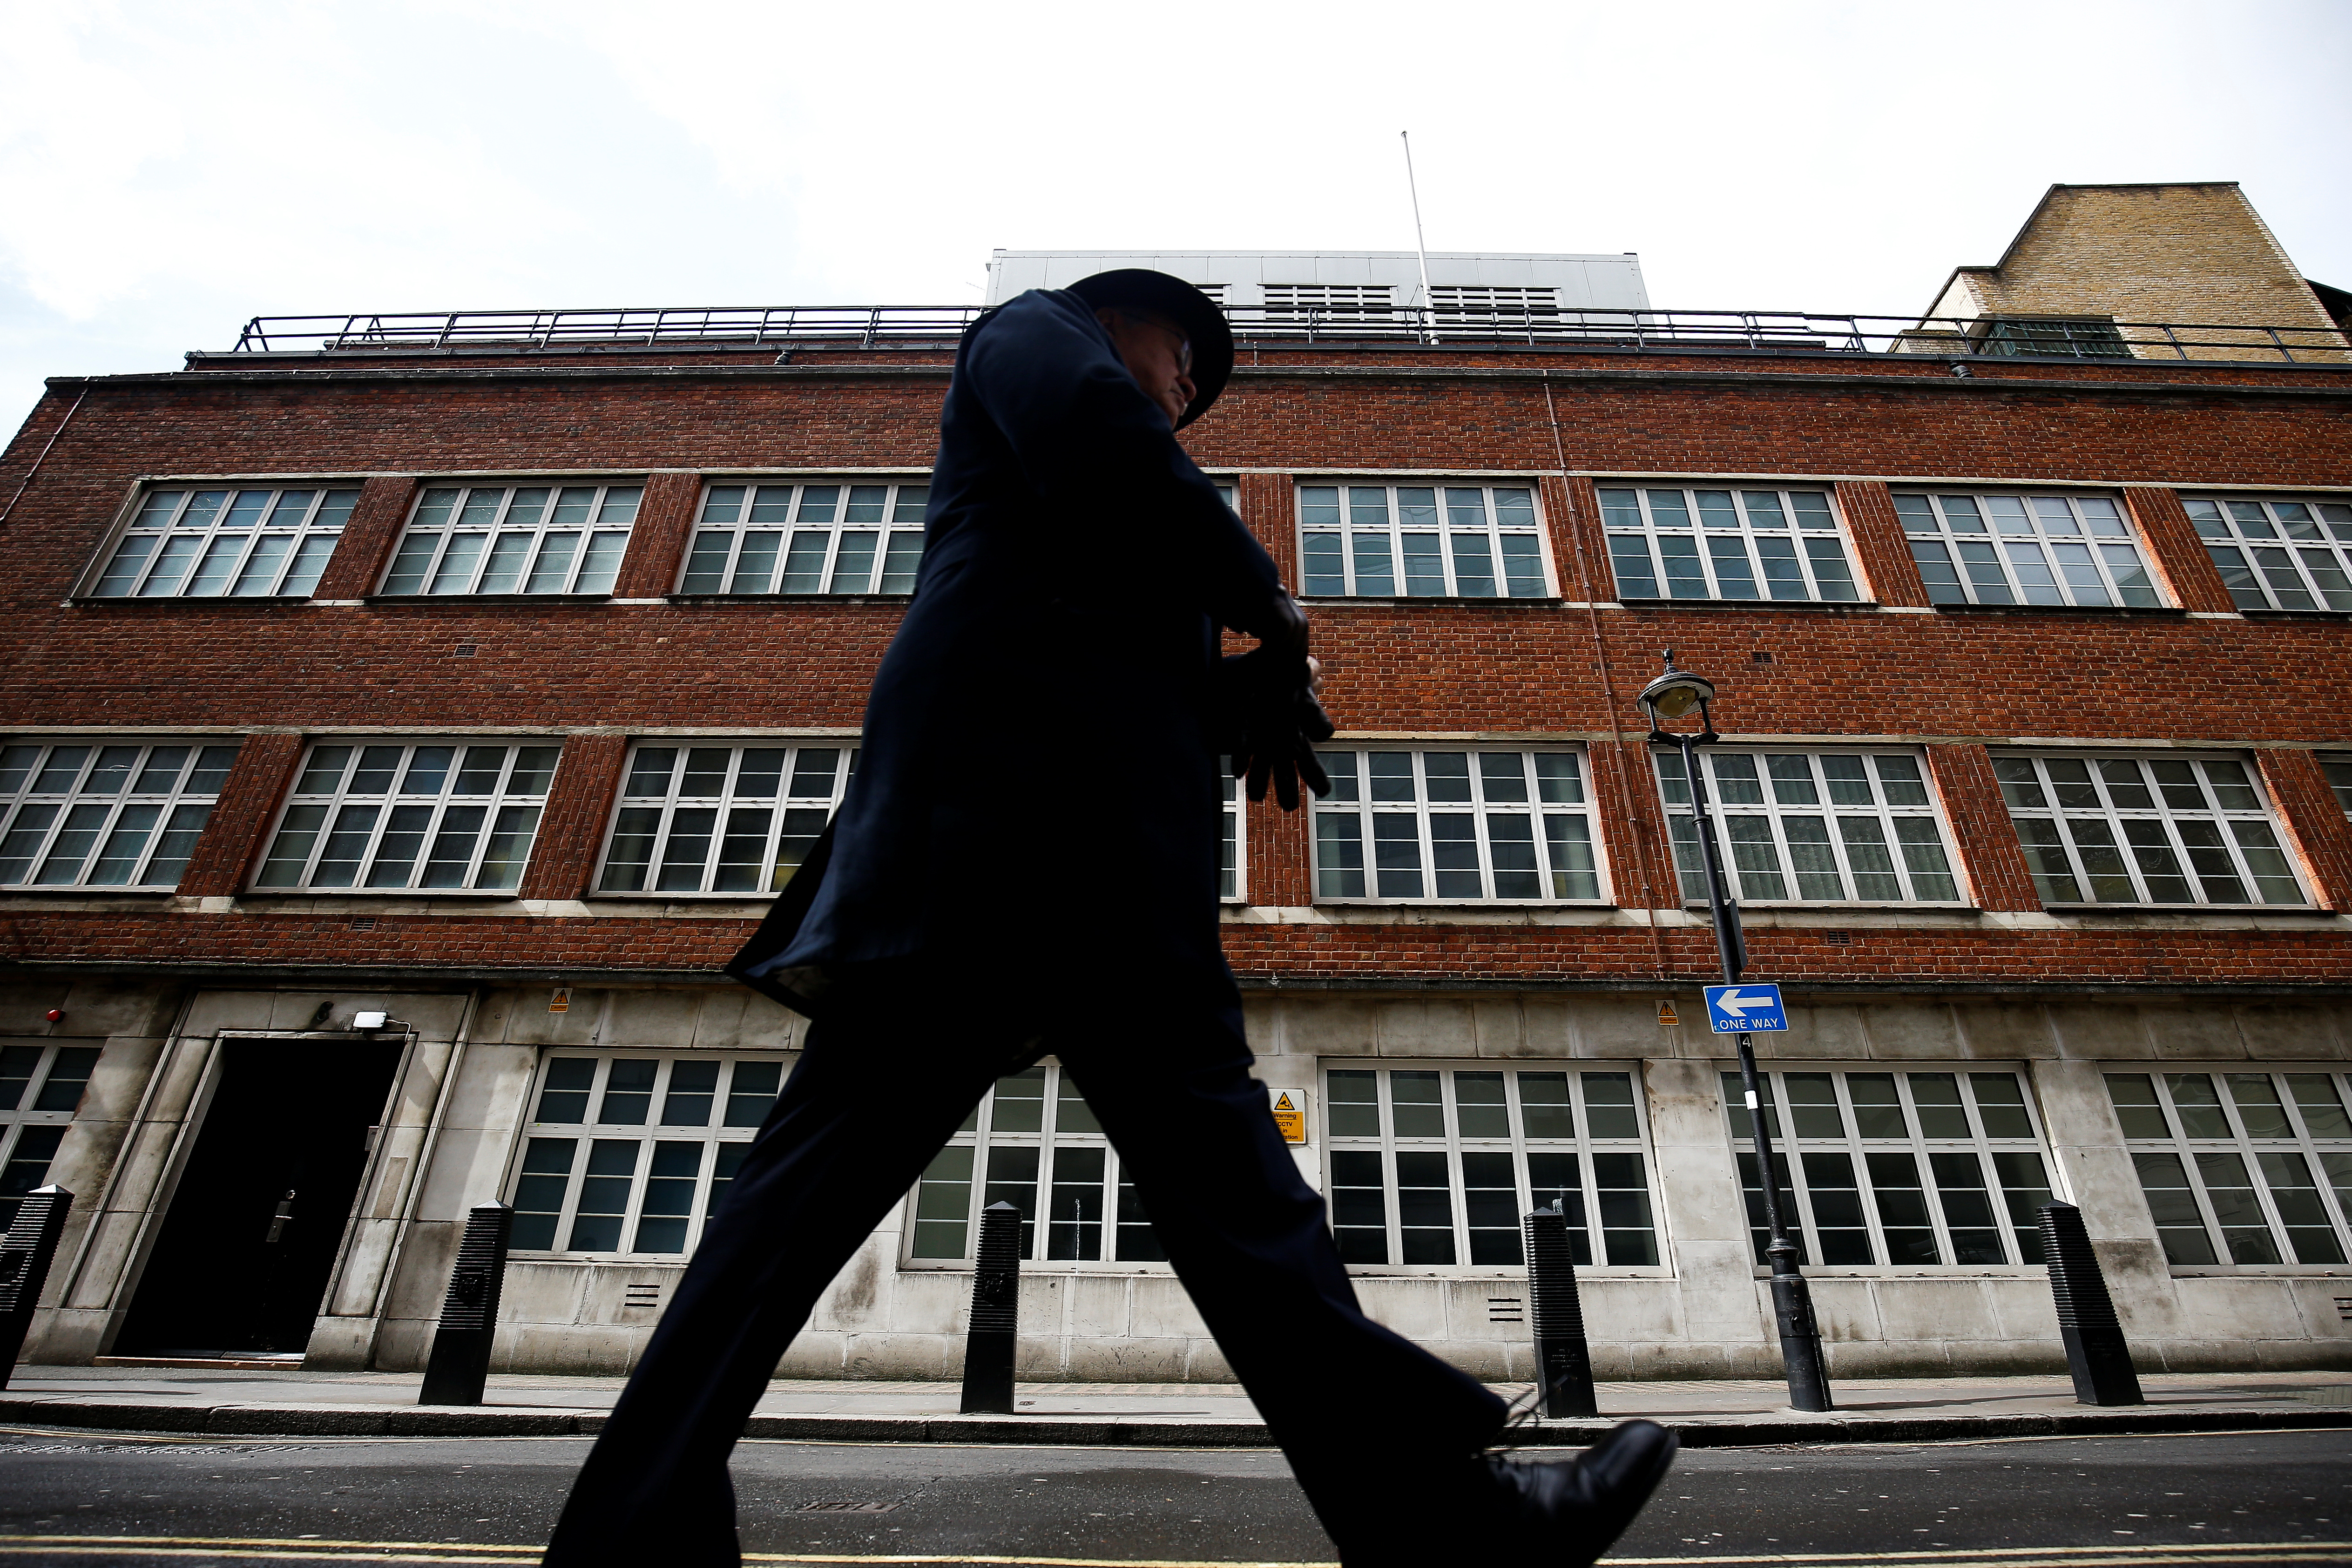 The former headquarters of Intelligence, Cyber and Security Agency GCHQ, is seen in Palmer Street, after the agency revealed the location, following its departure to new undisclosed offices, in London